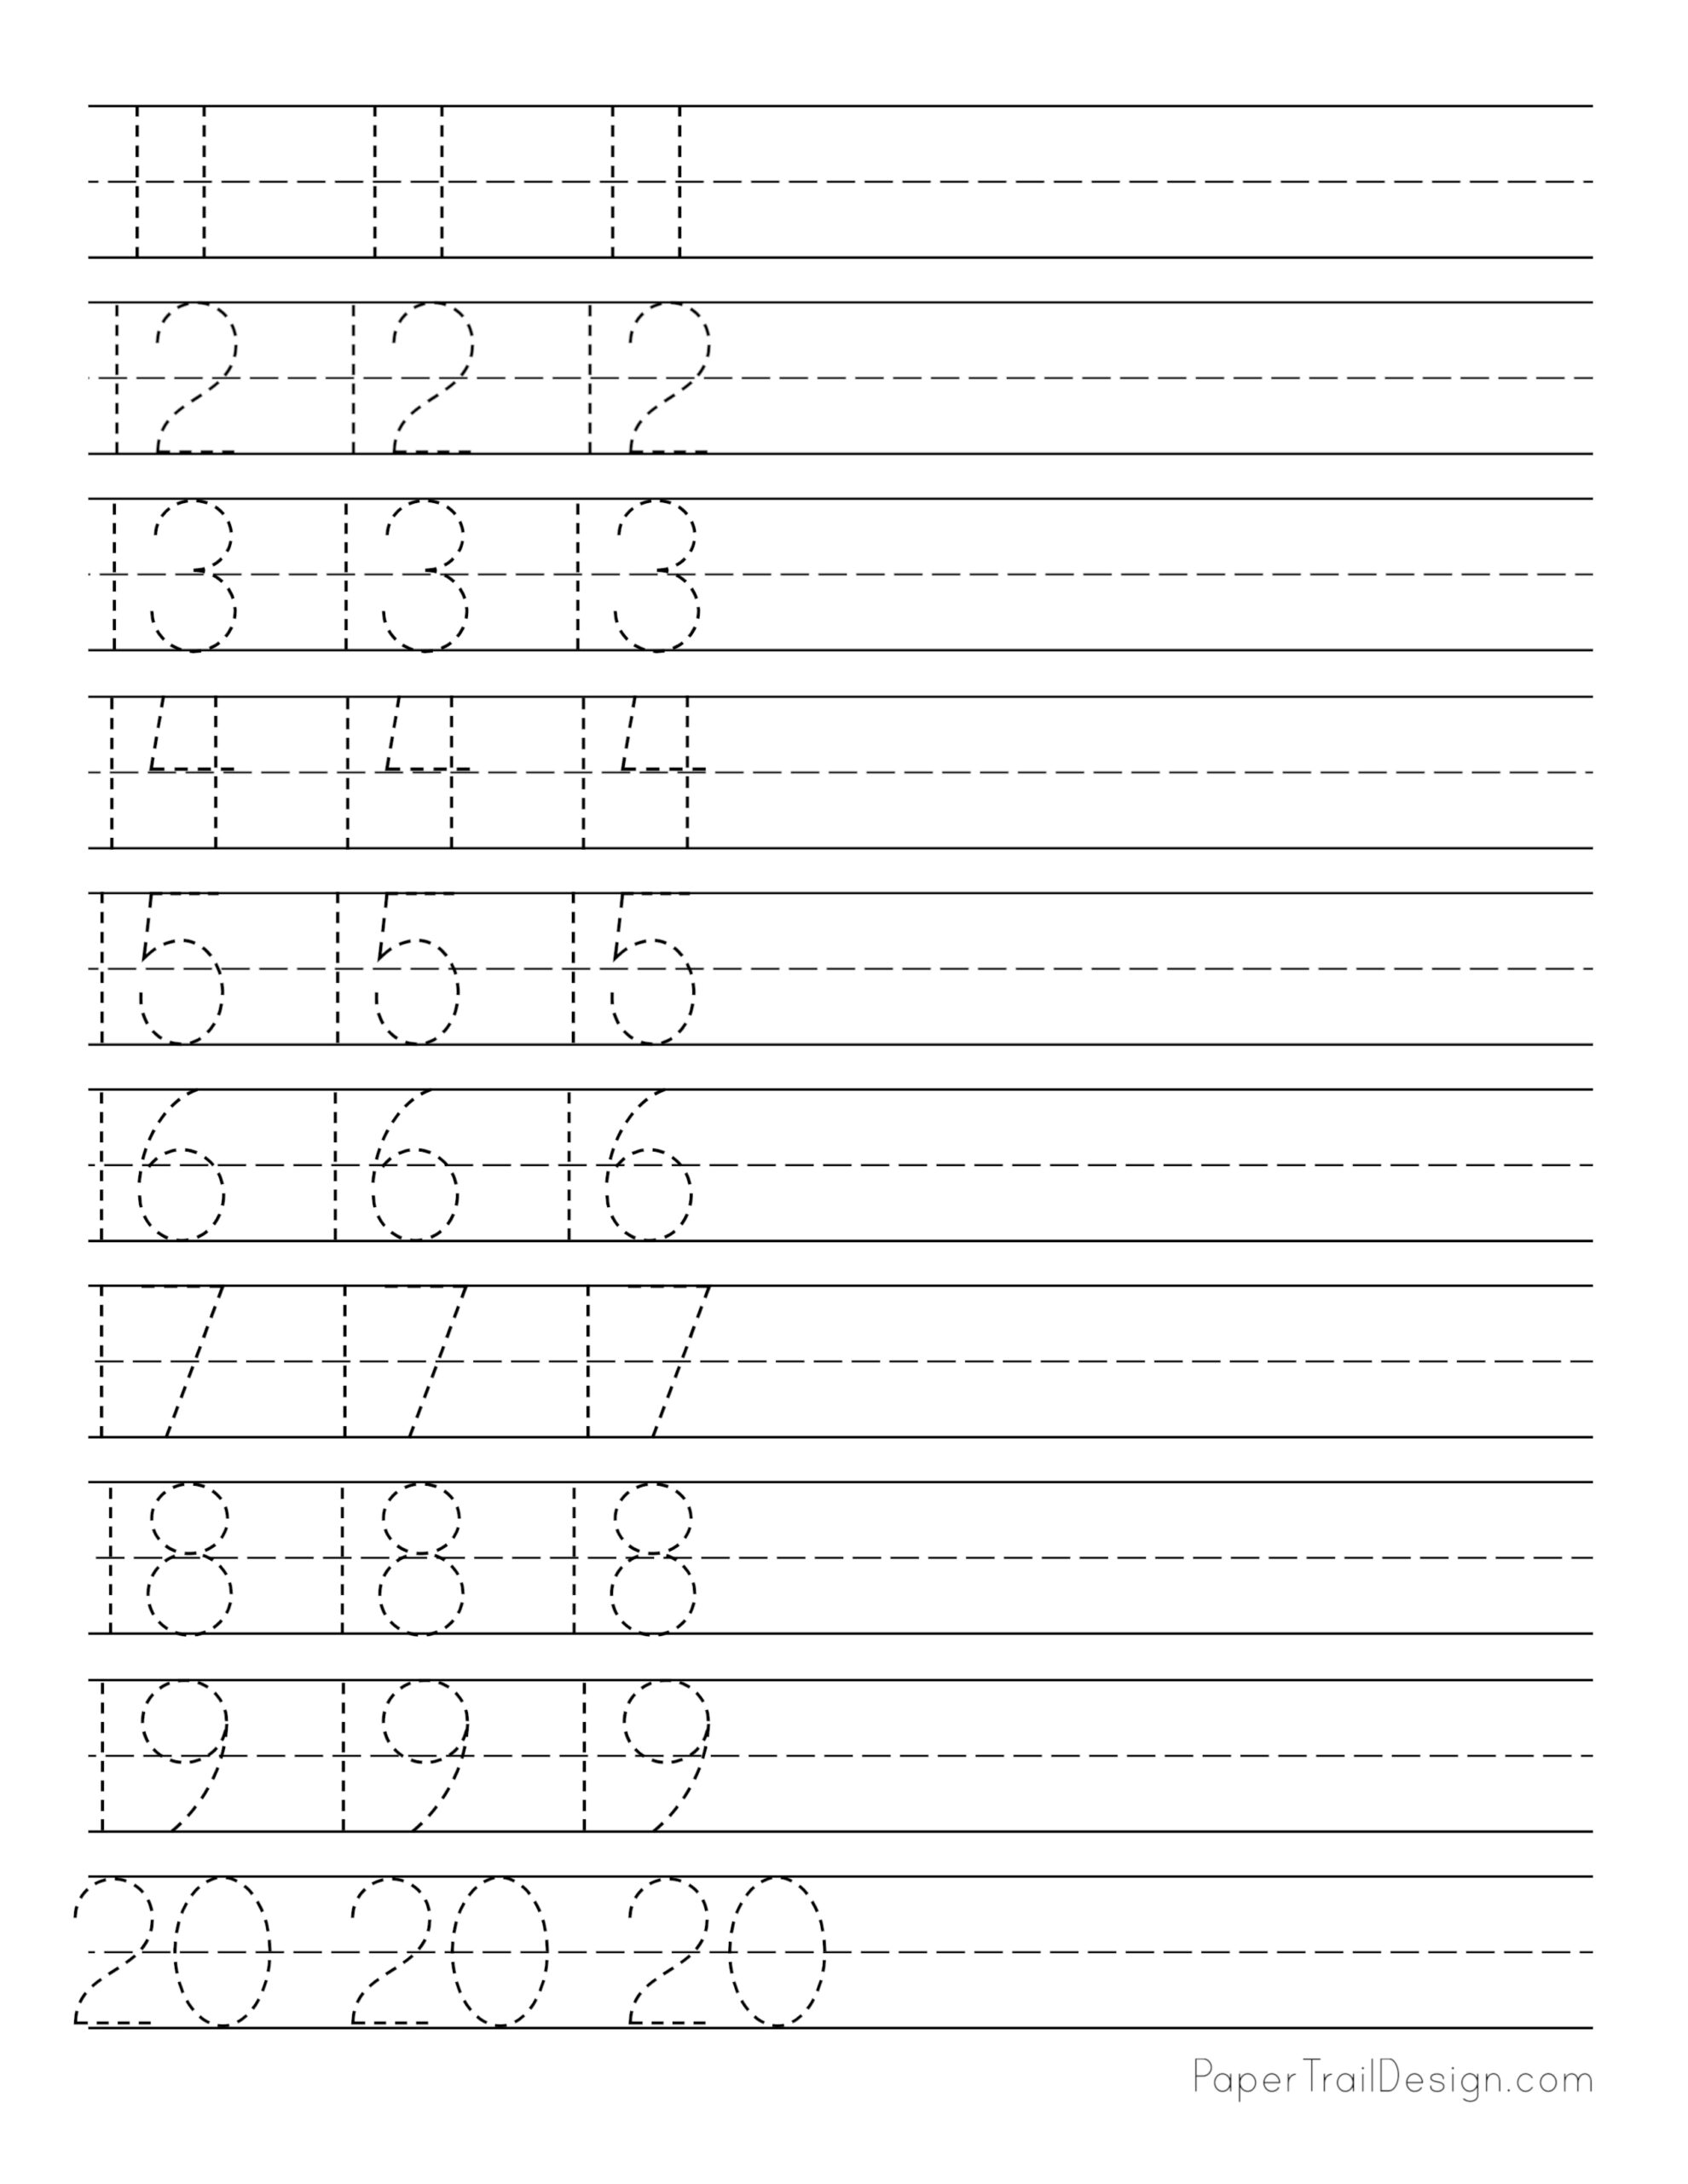 free-trace-the-numbers-11-20-worksheets-for-kids-number-tracing-11-20-worksheet-digital